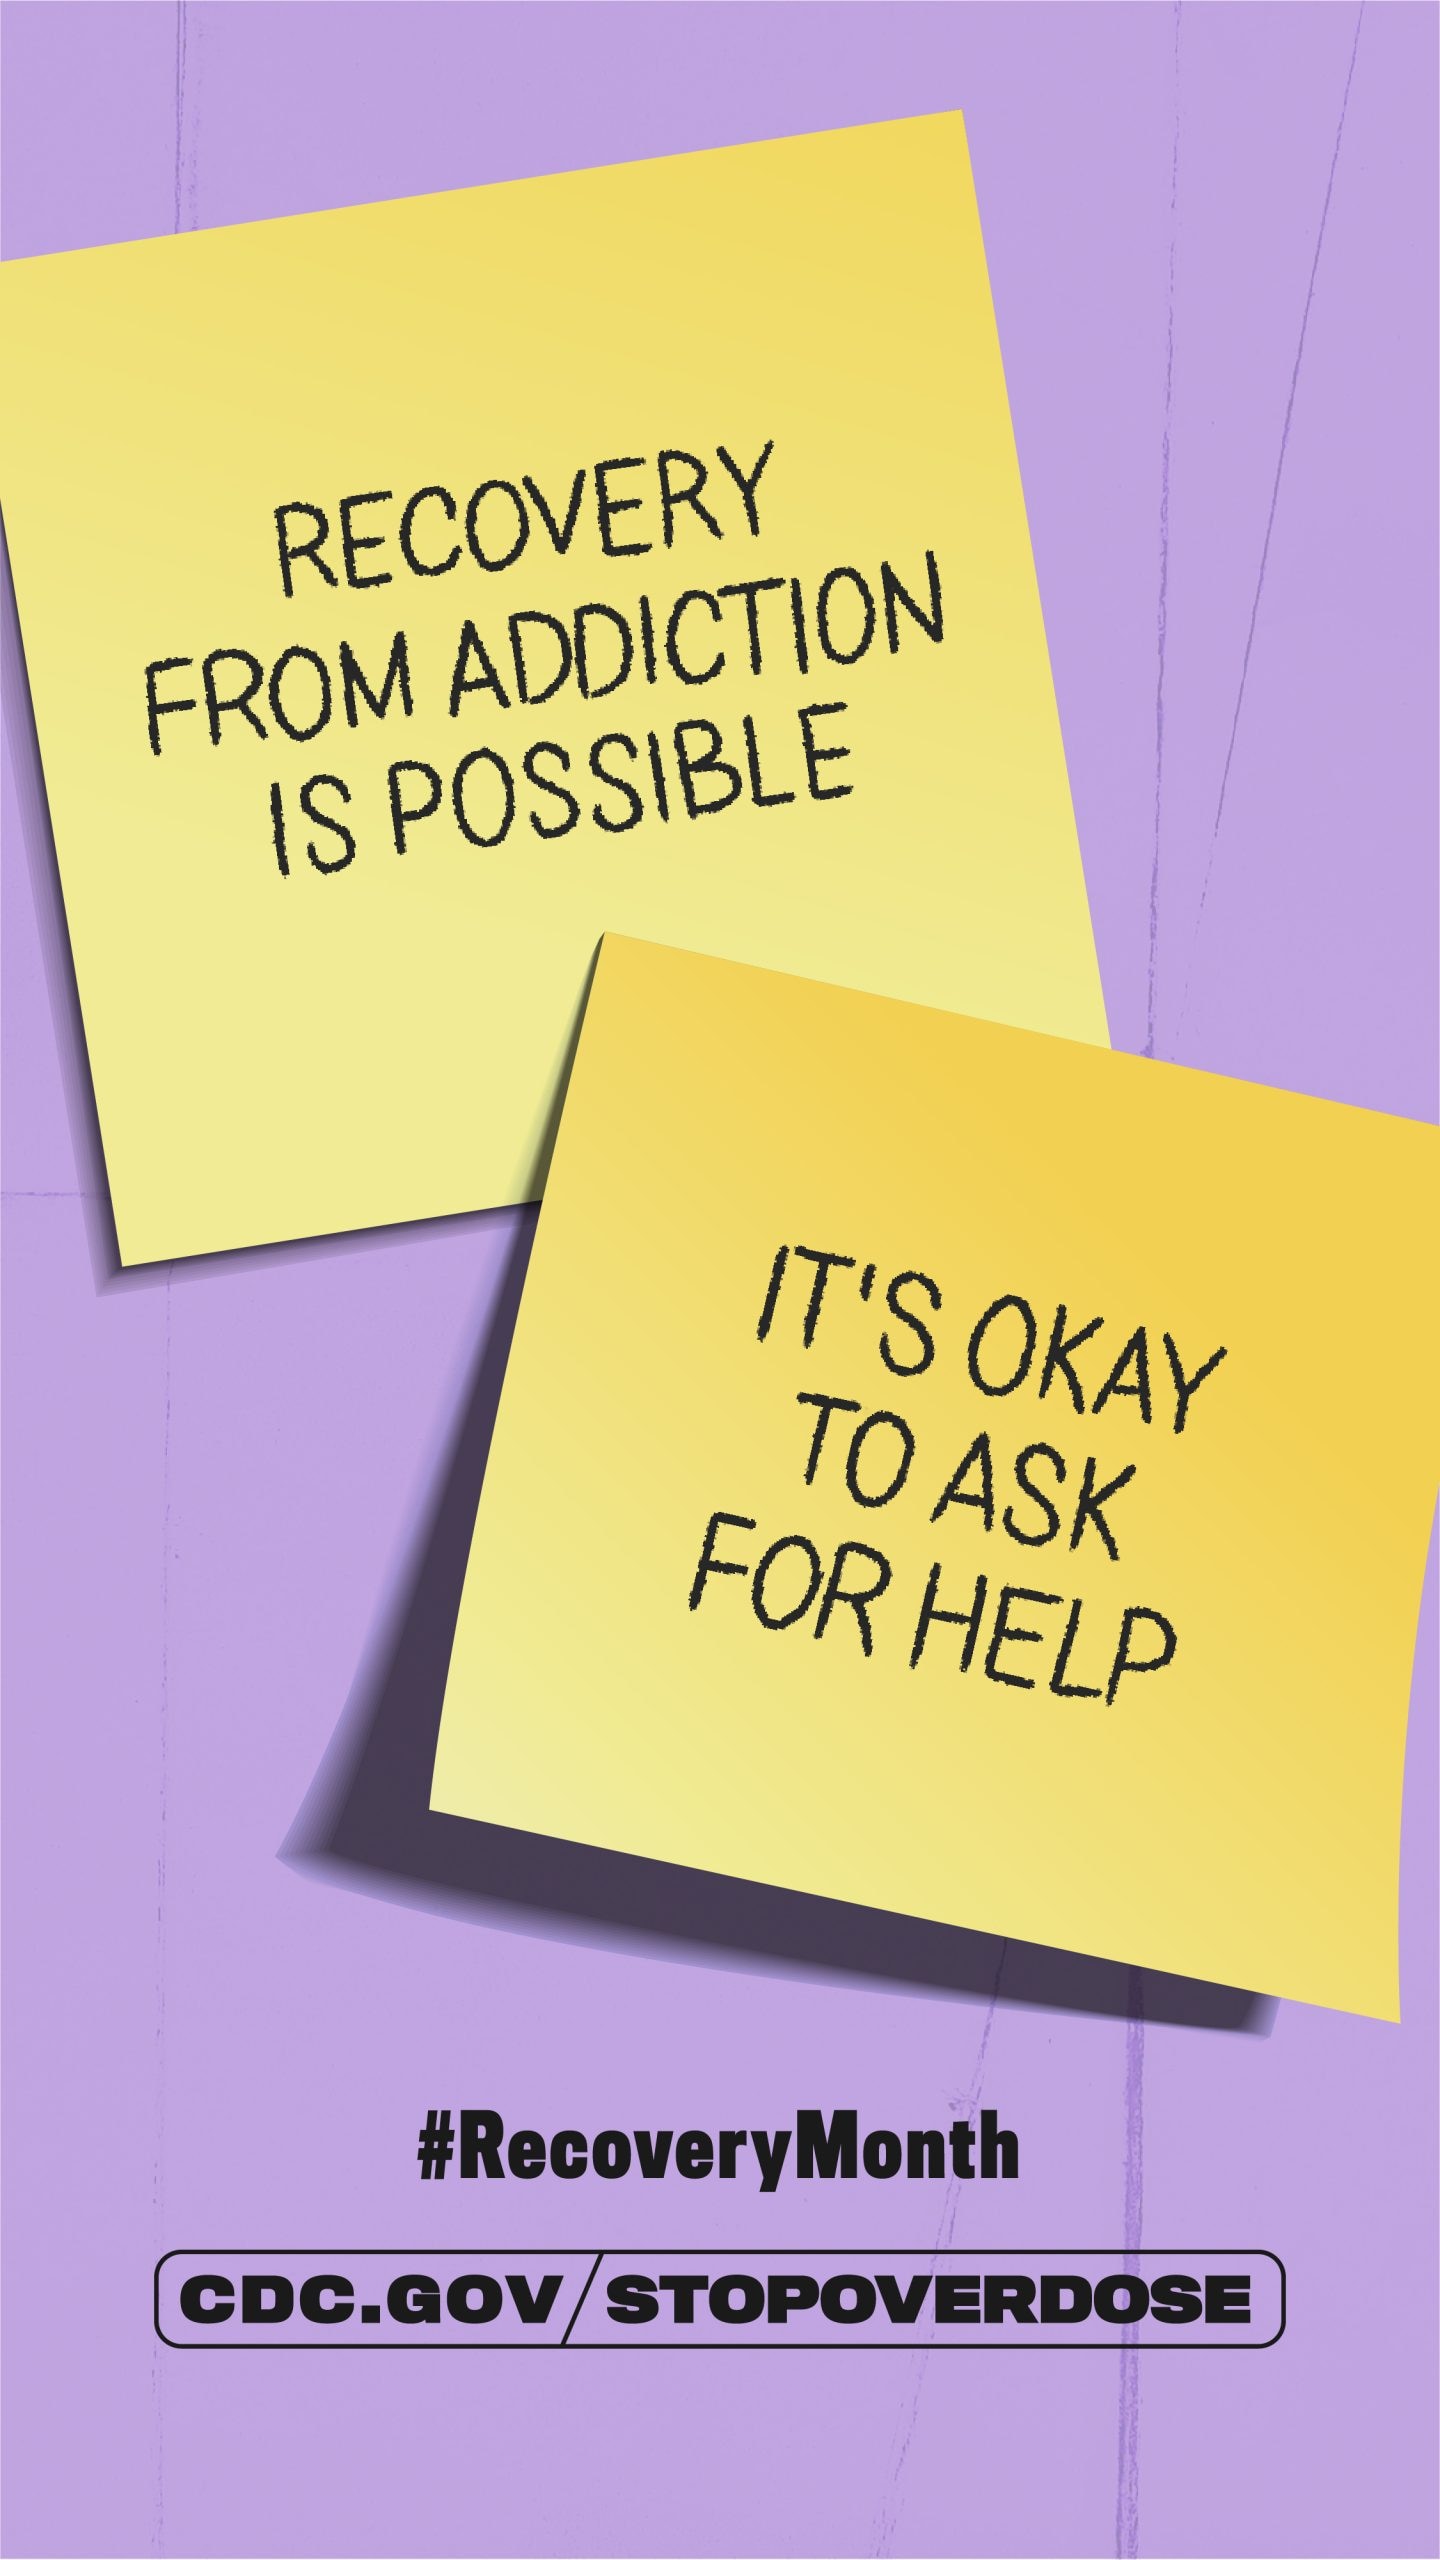 Recovery from addiction is possible. It's ok to ask for help.